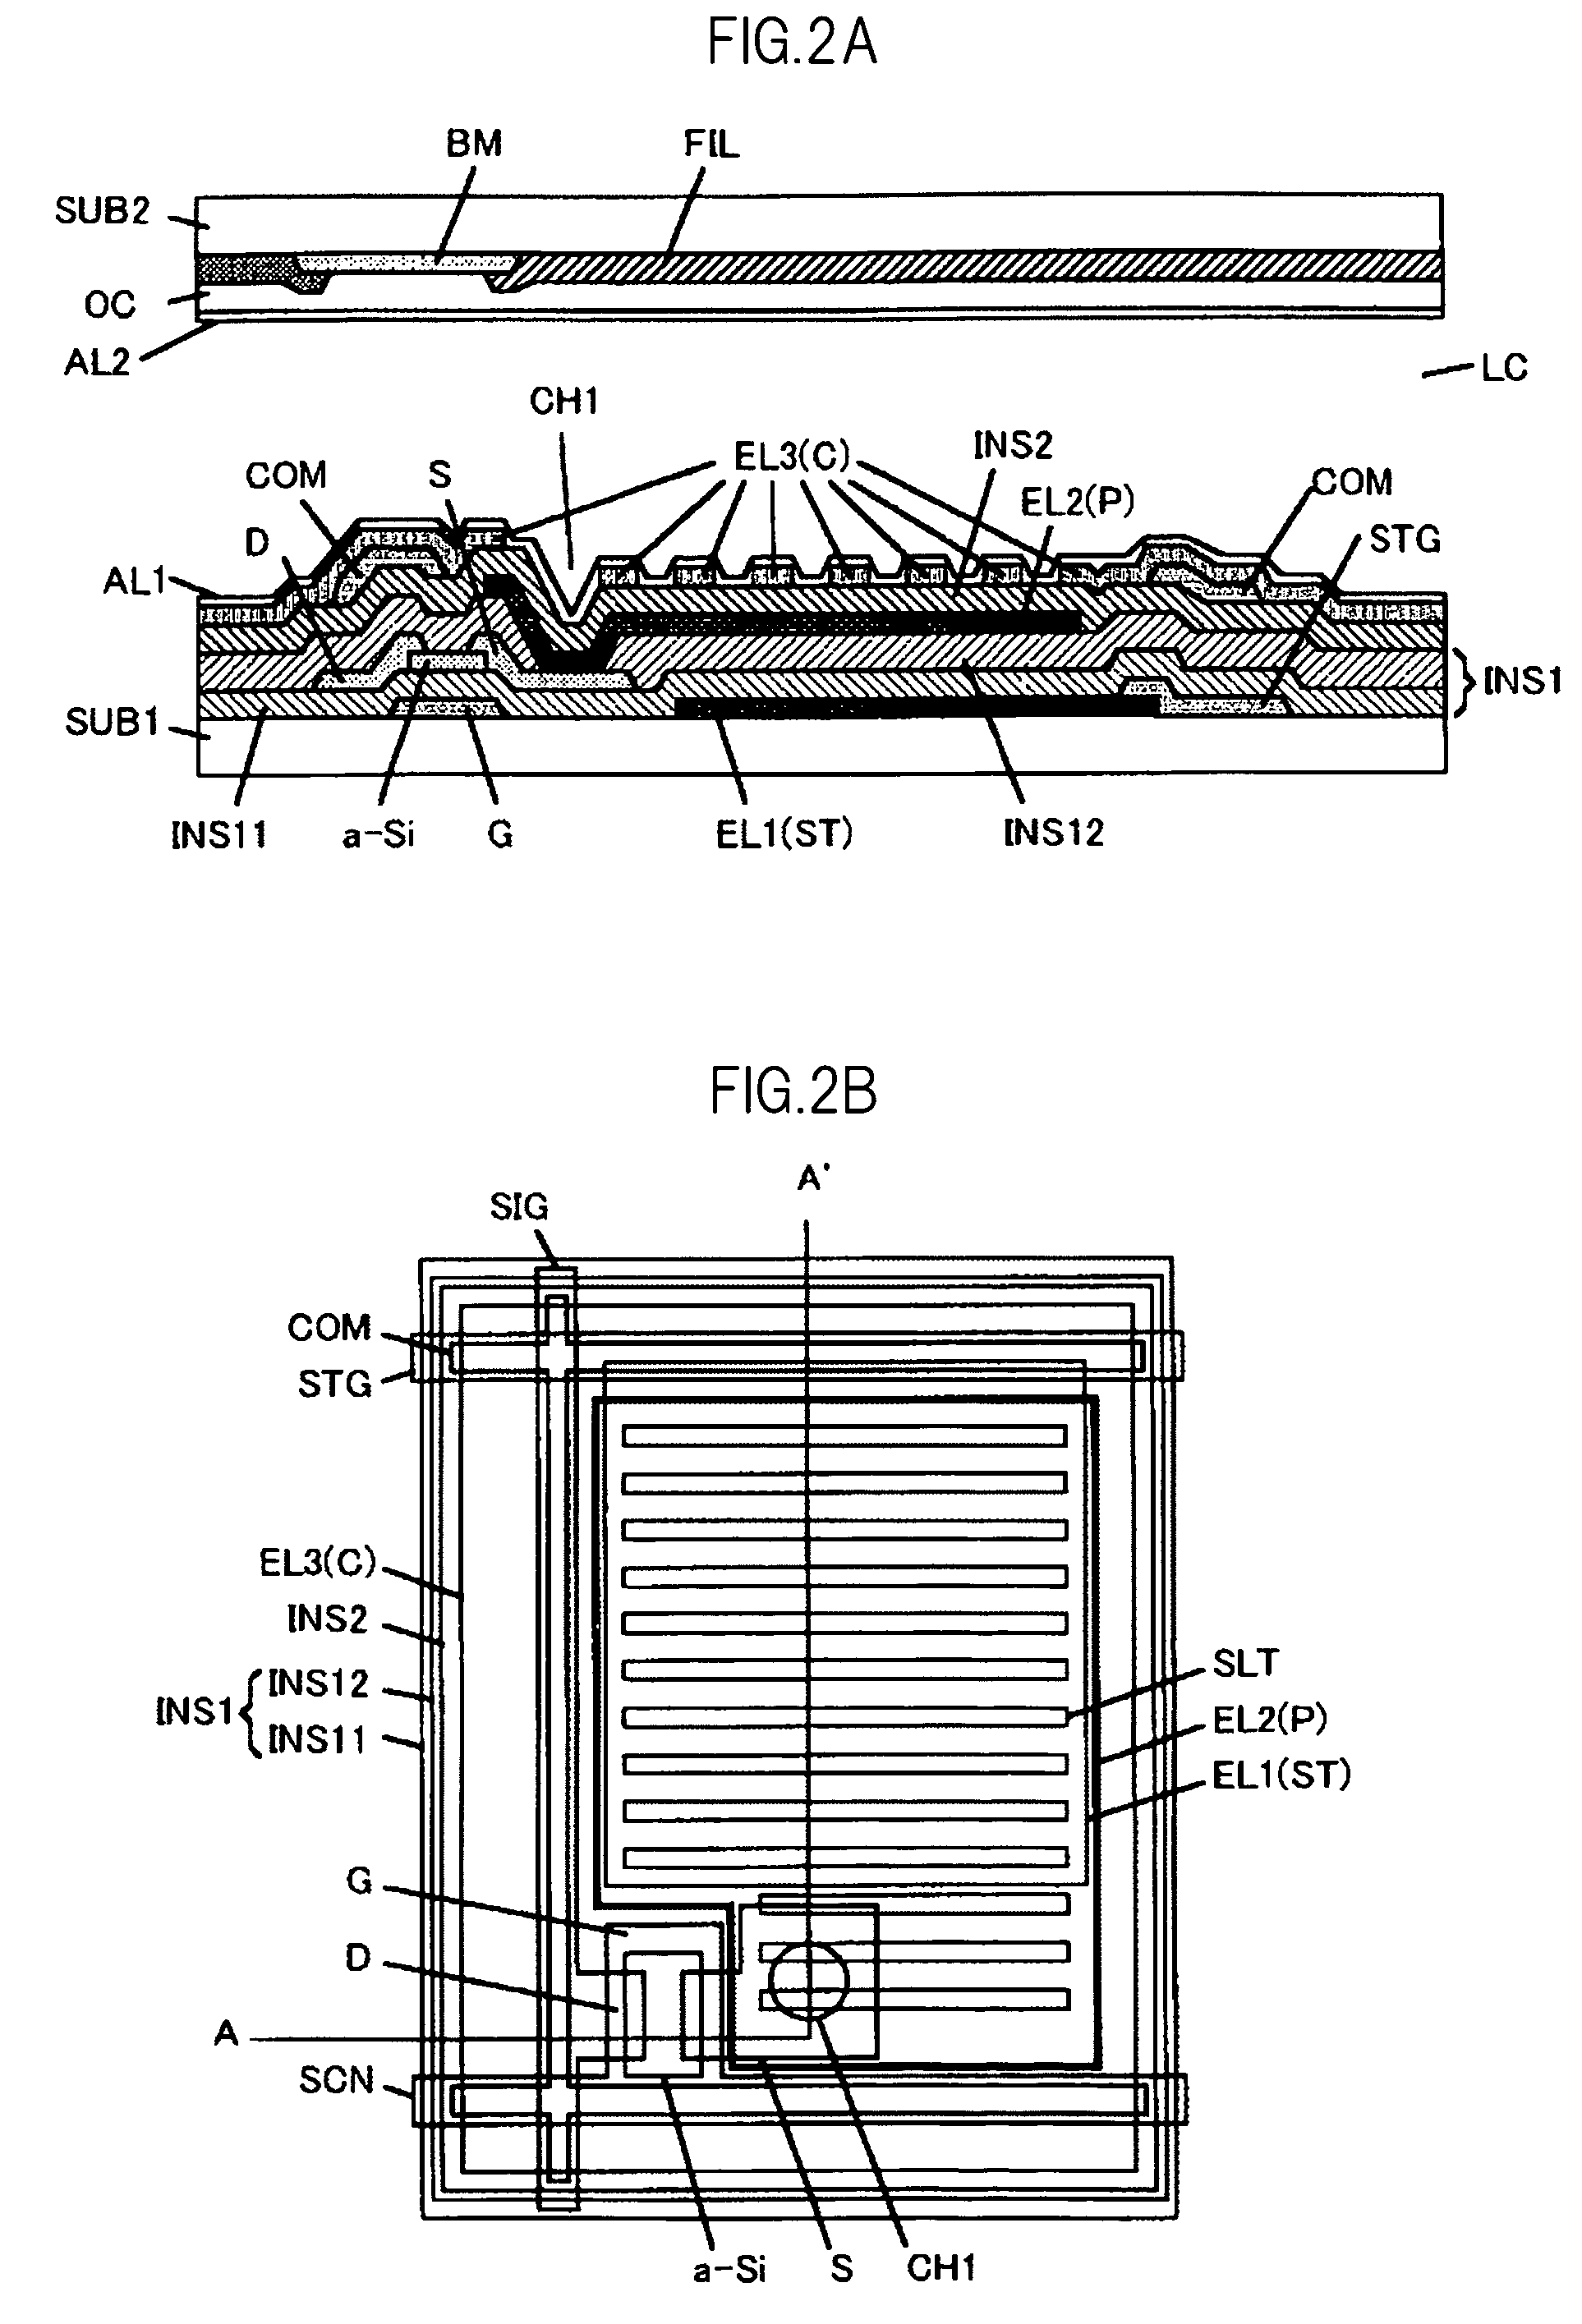 Liquid crystal display device having first, second, and third transparent electrodes that form first and second storage capacitors